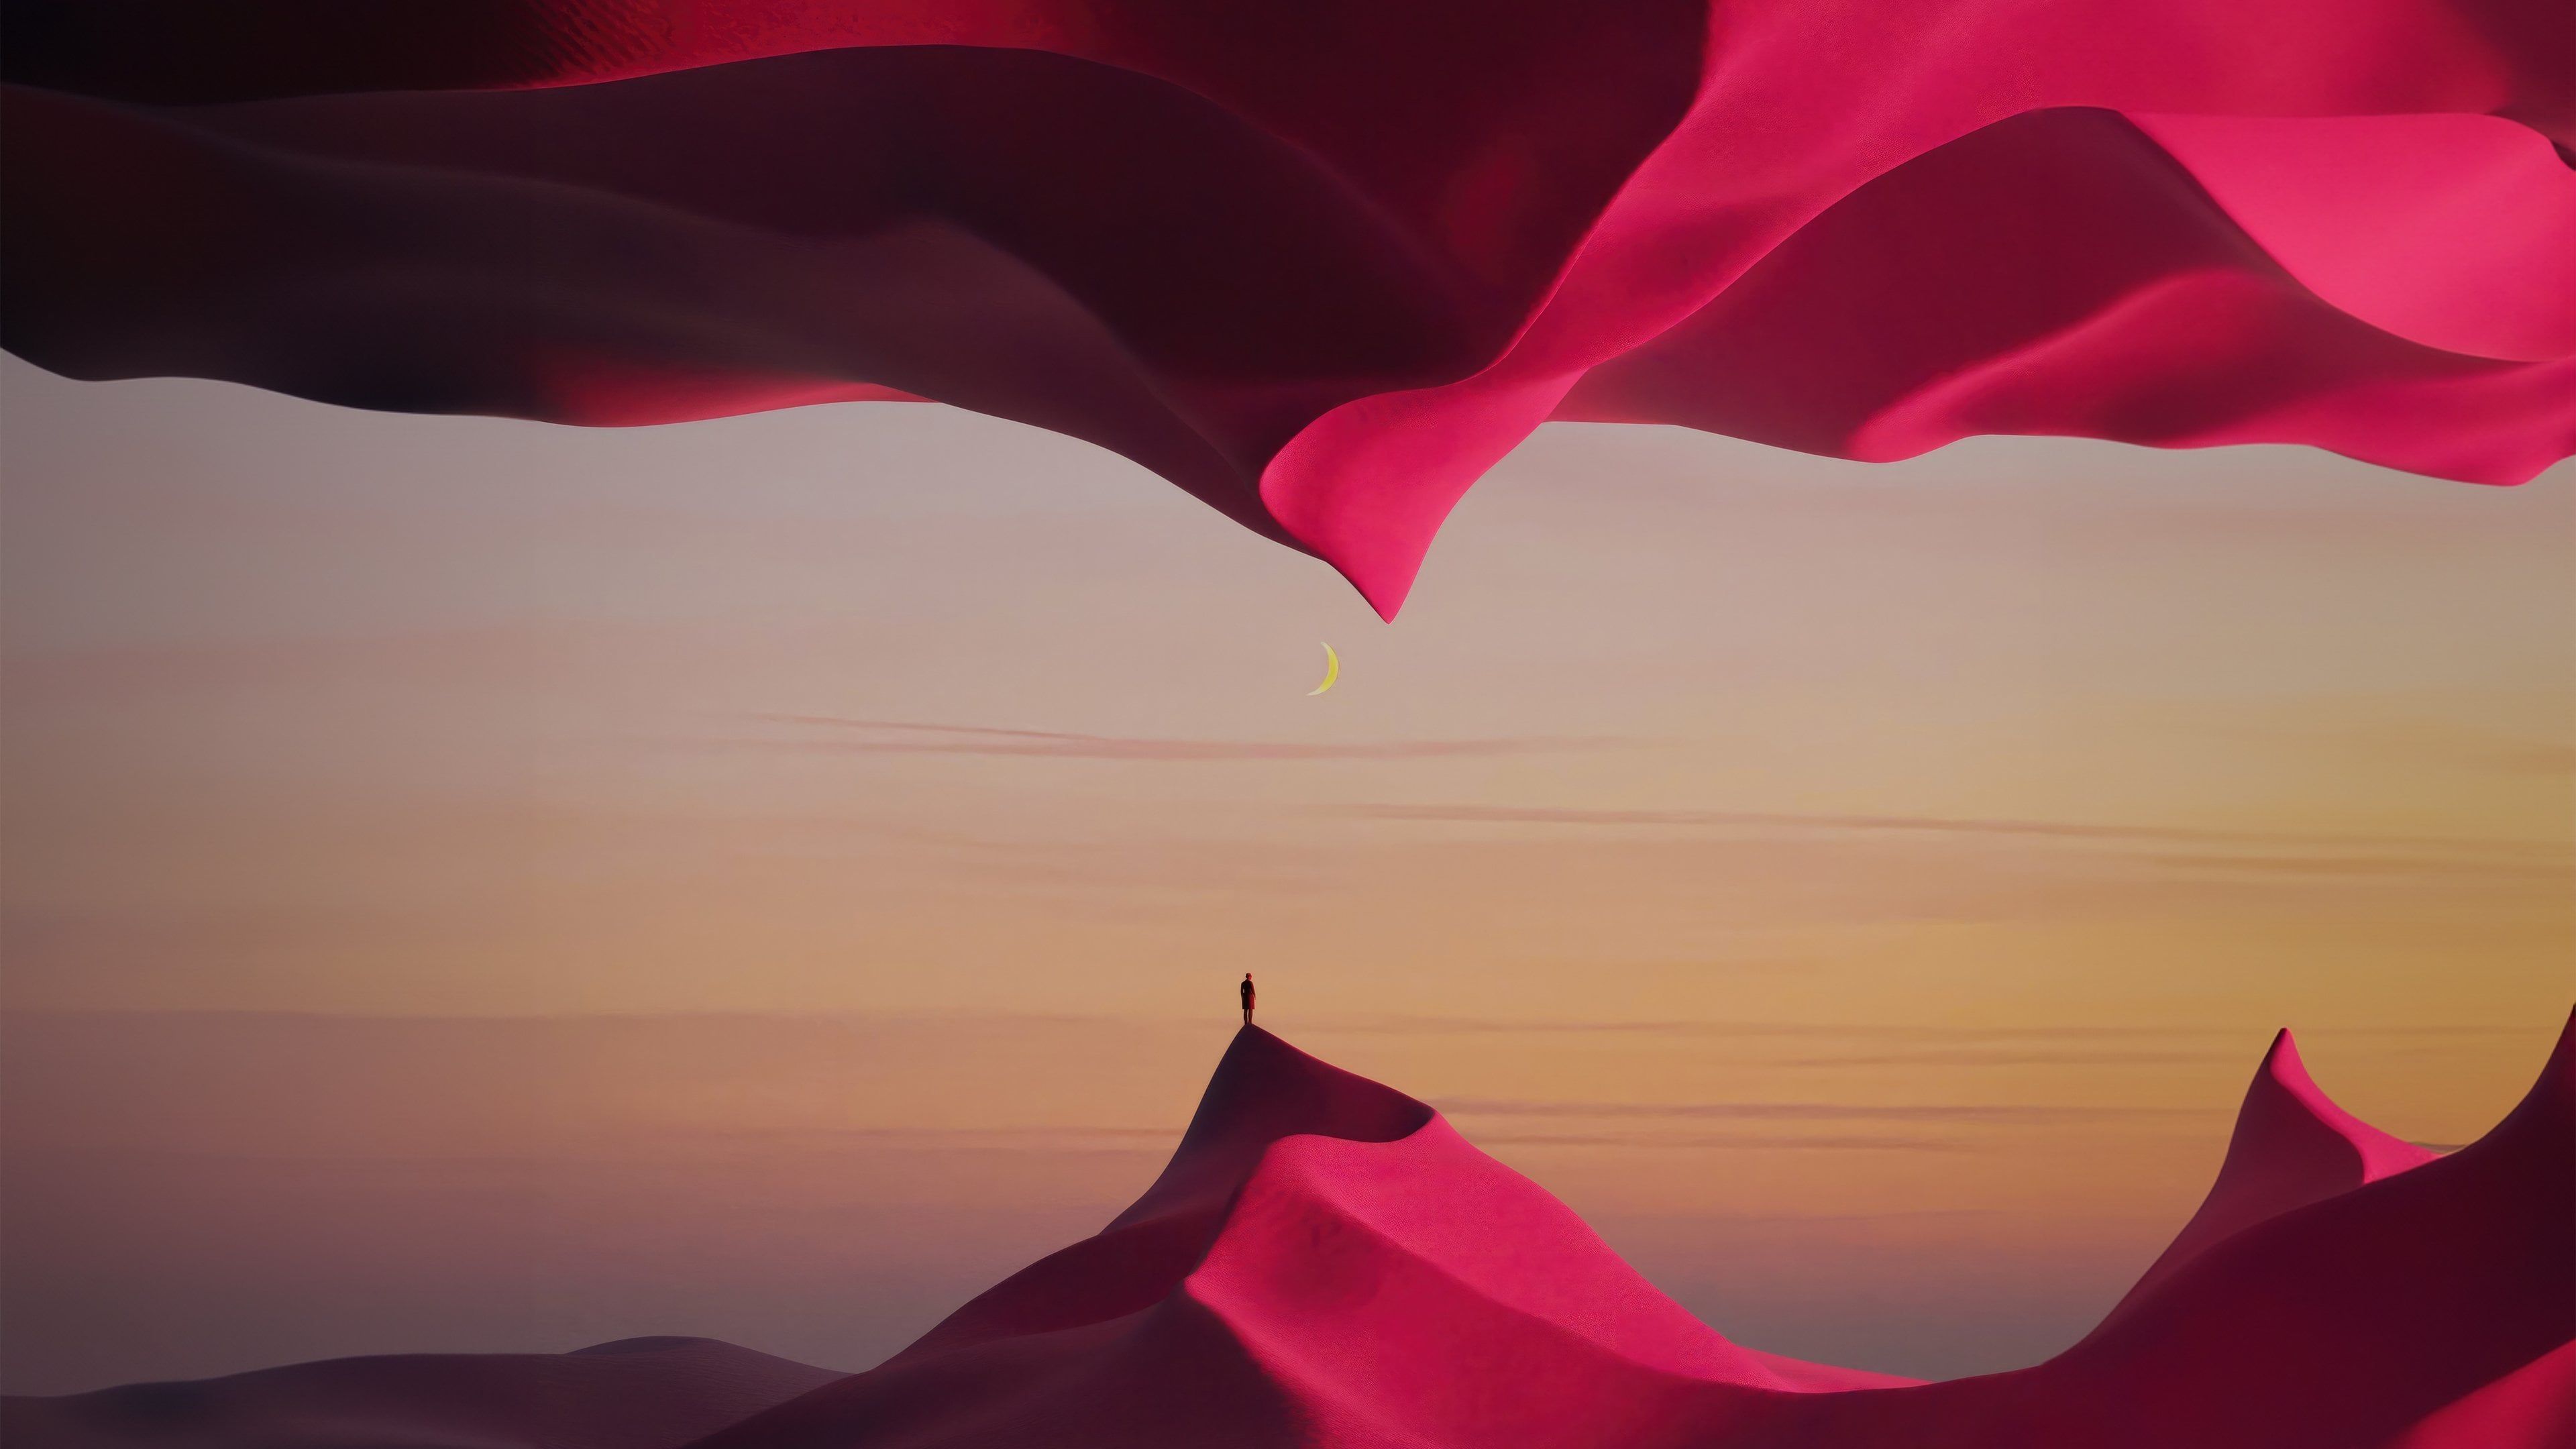 Pink fabric swaying in the wind with a person standing on a hill in the distance - Desert